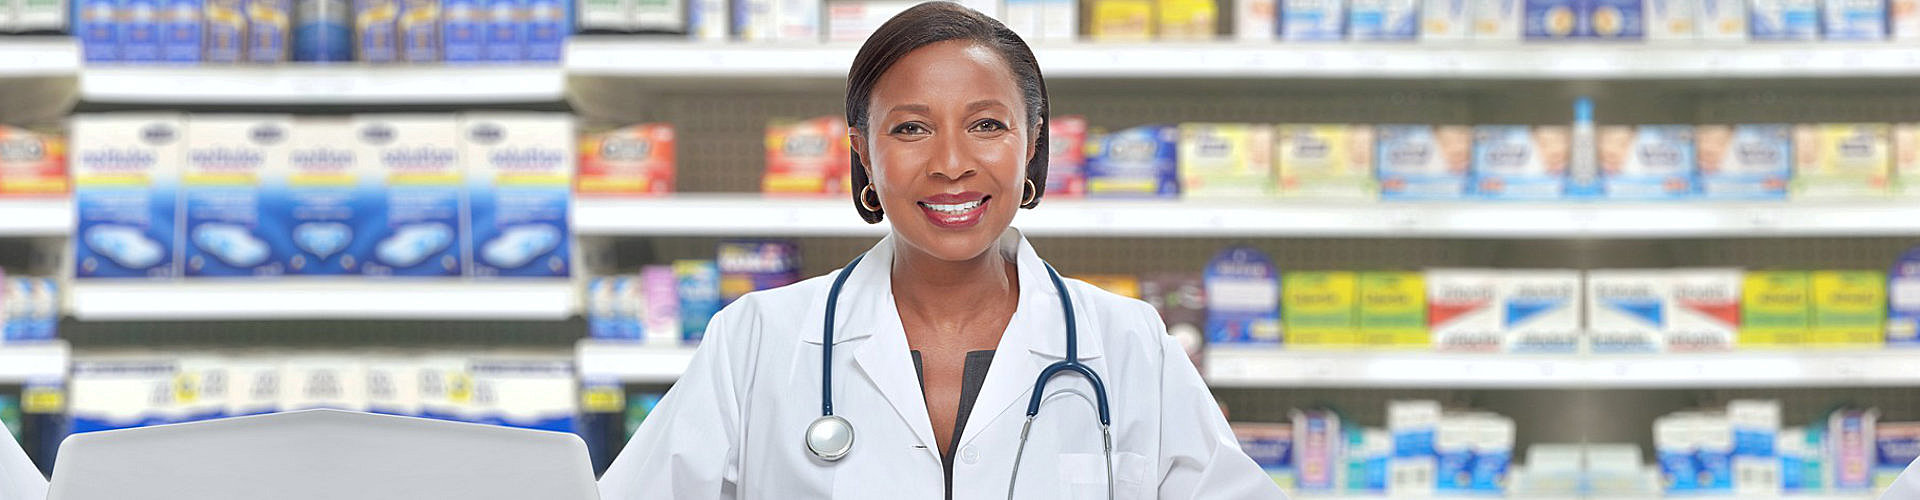 a woman pharmacist smiling